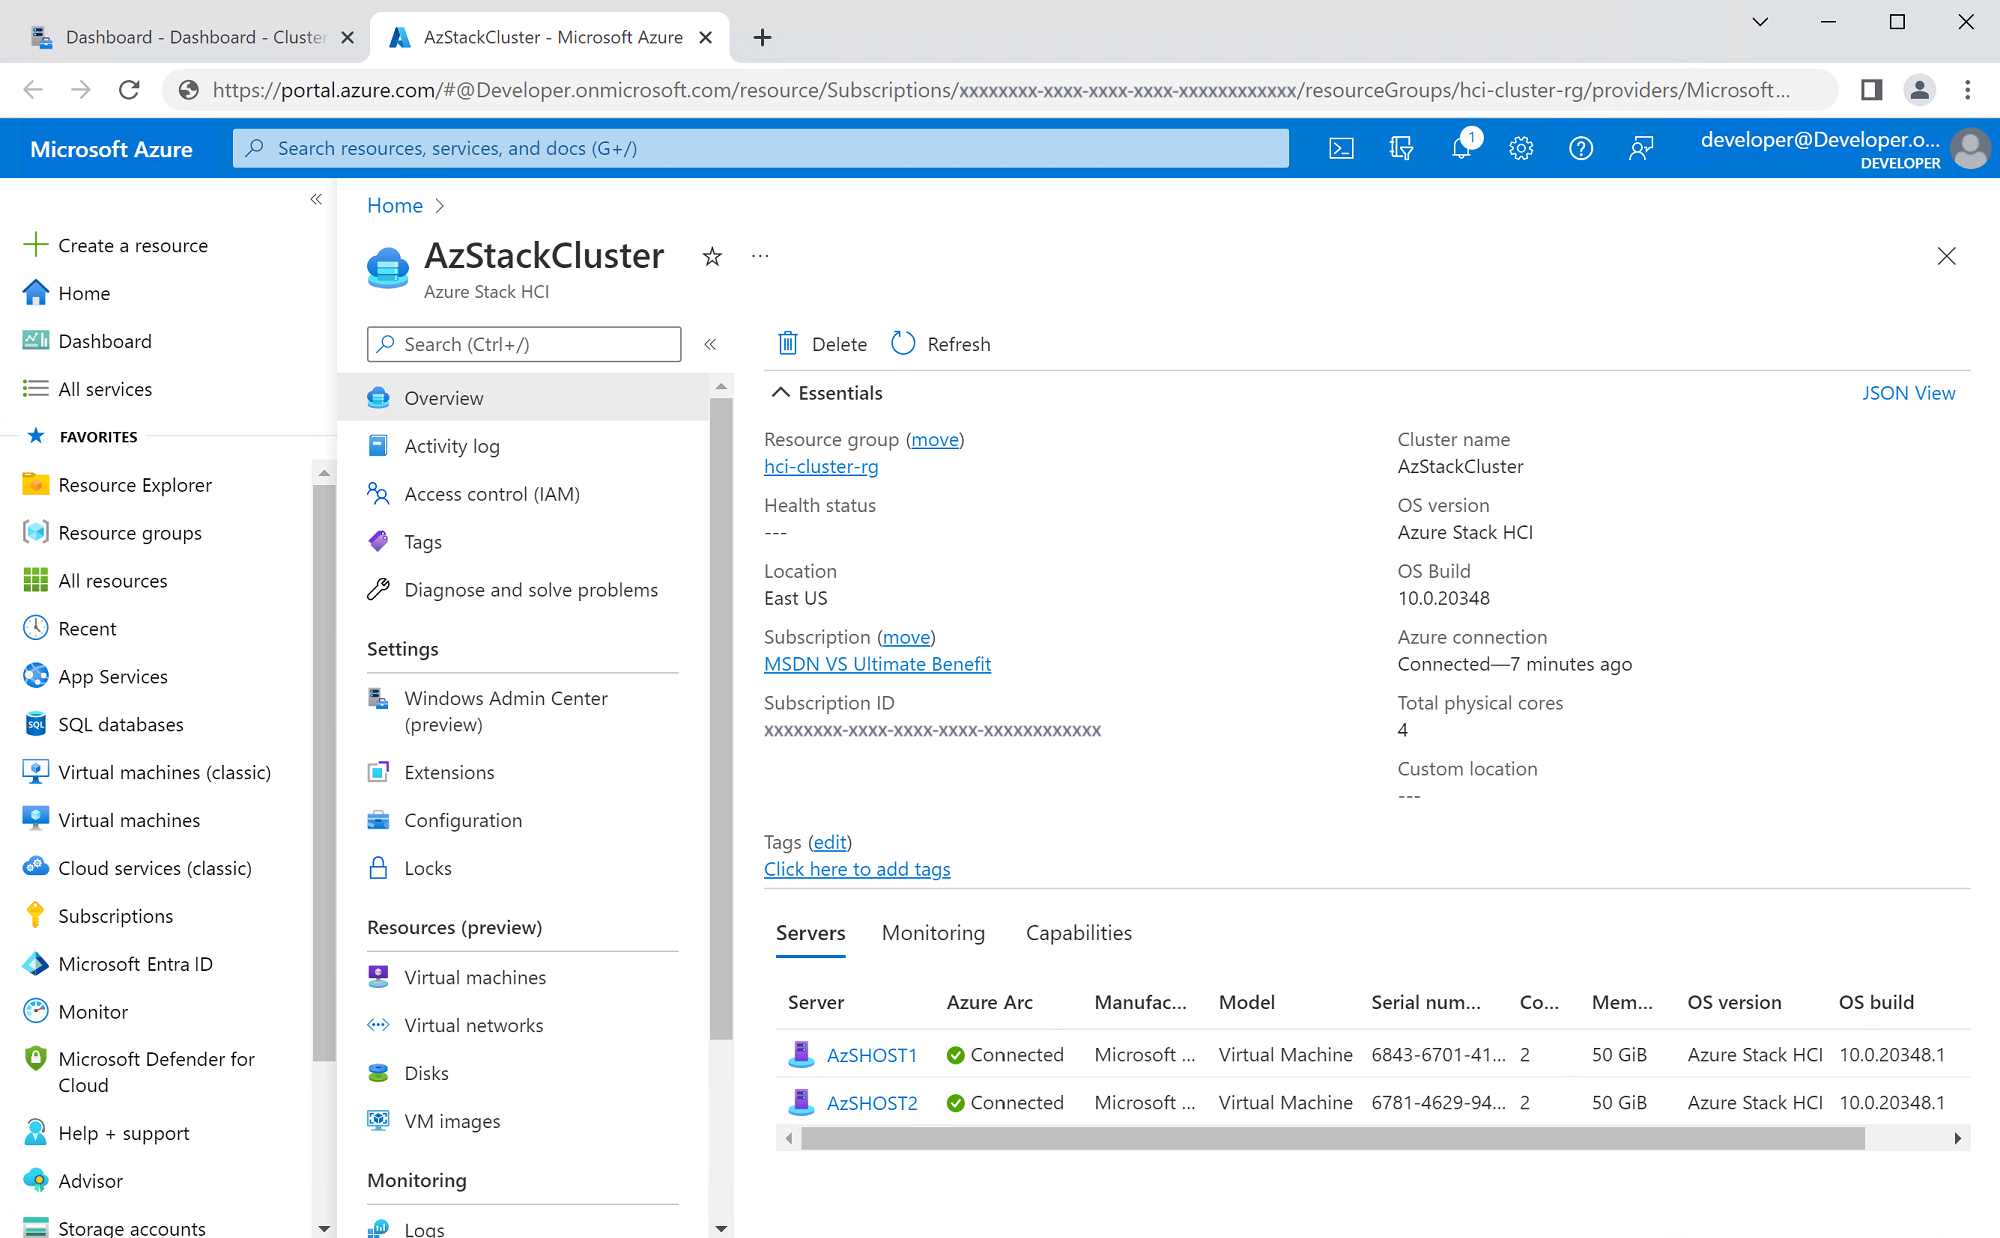 Confirm Azure subscription, resource group, and region selections